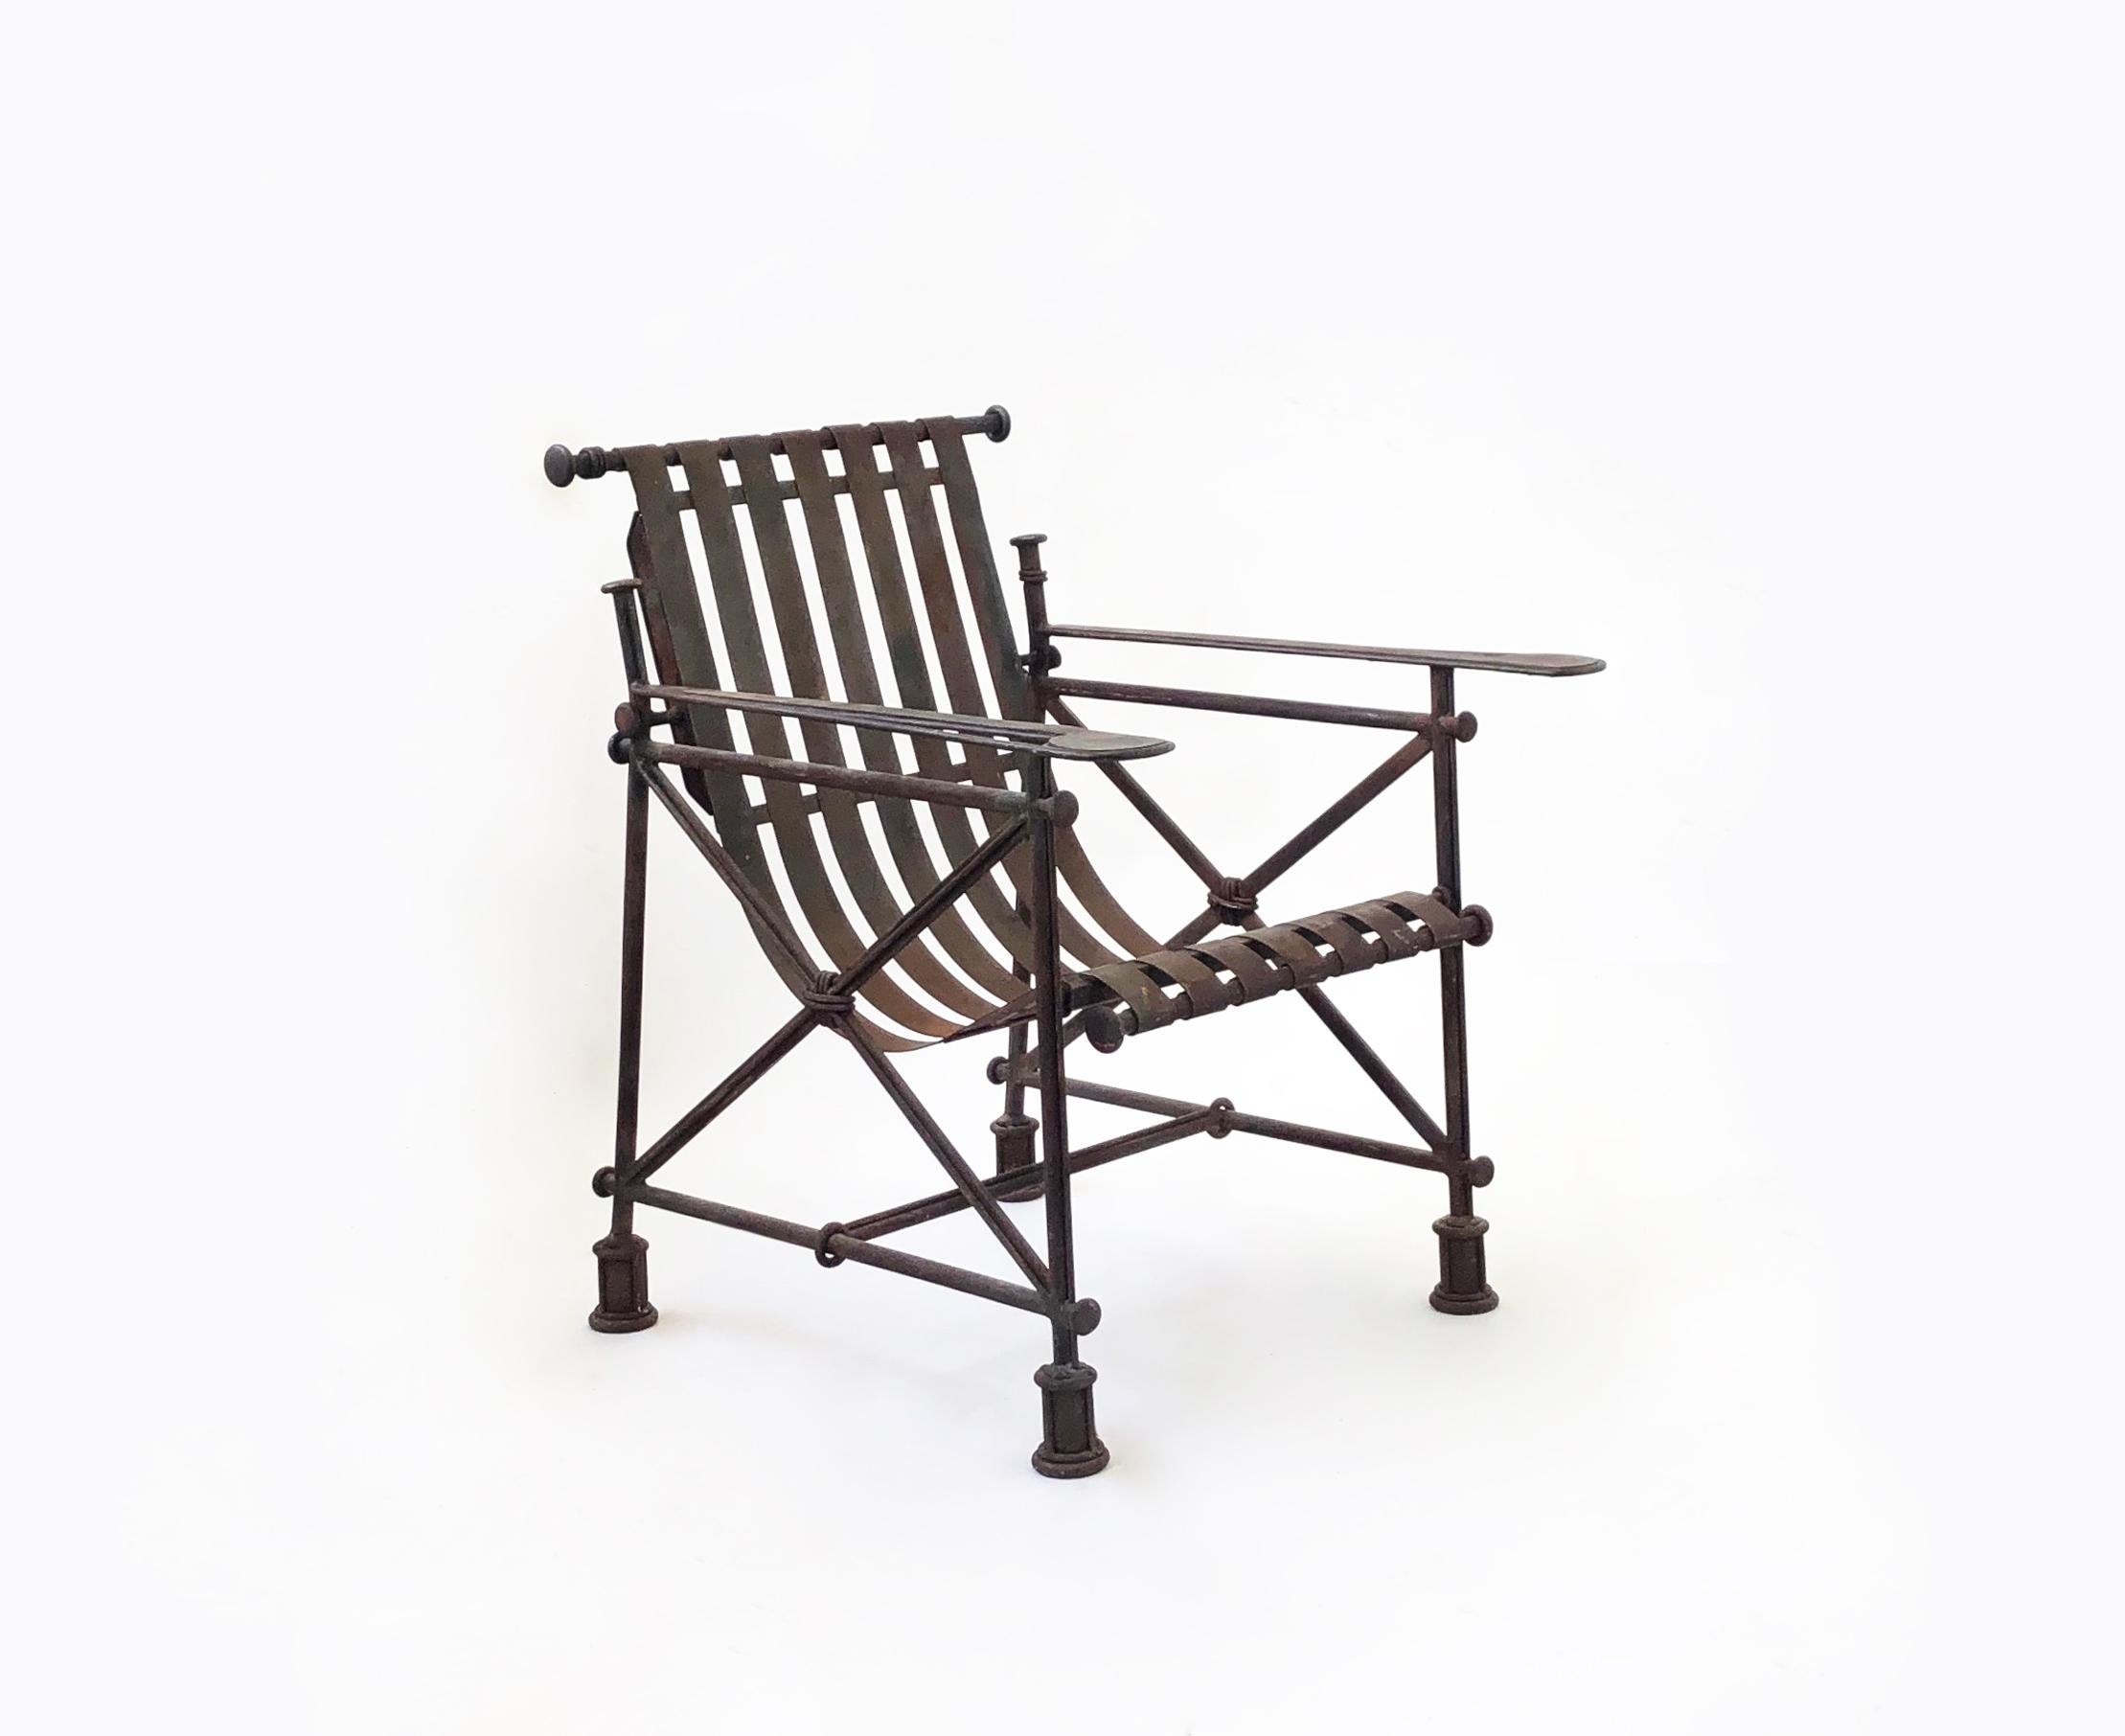 Brutalist armchair in forged iron by artist Ilana Goor, with original patina and signed plaque on the bottom stretcher.
Measure: Arm height 62 cm.